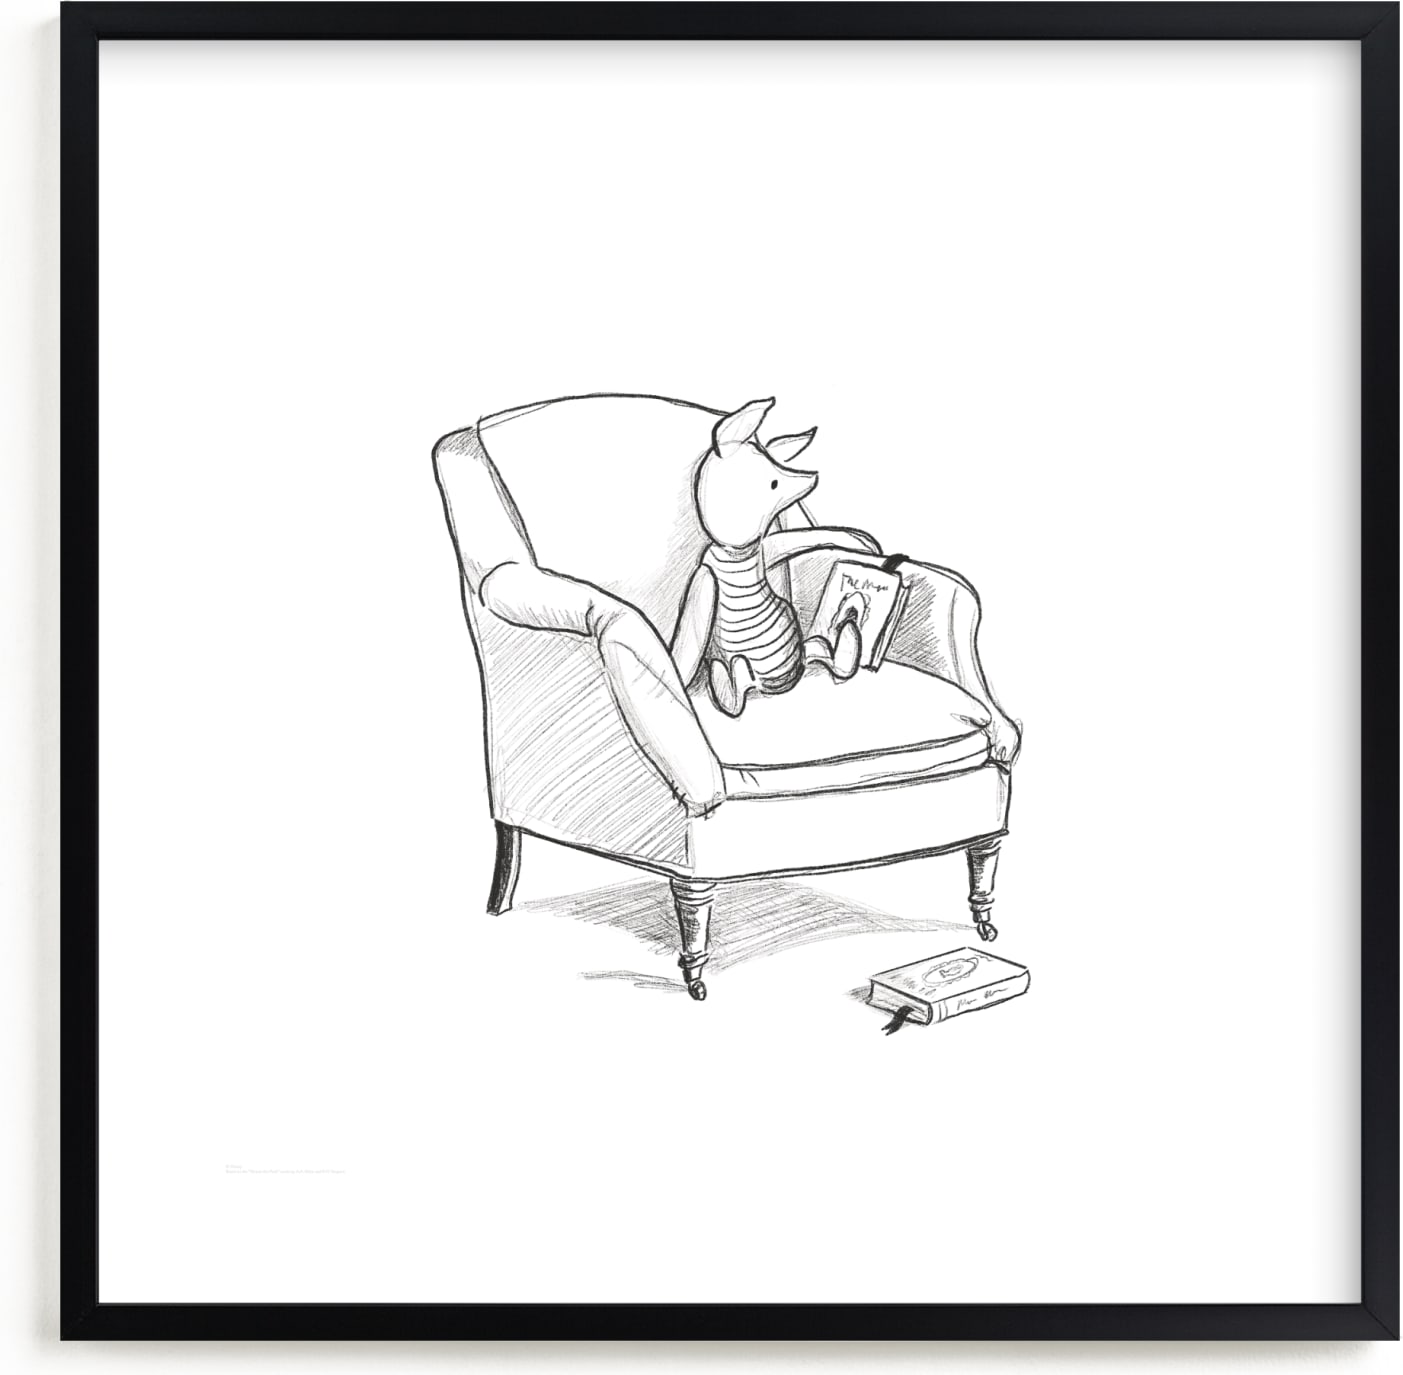 This is a black and white disney art by Stefanie Lane called Piglet Lounging | Winnie The Pooh.